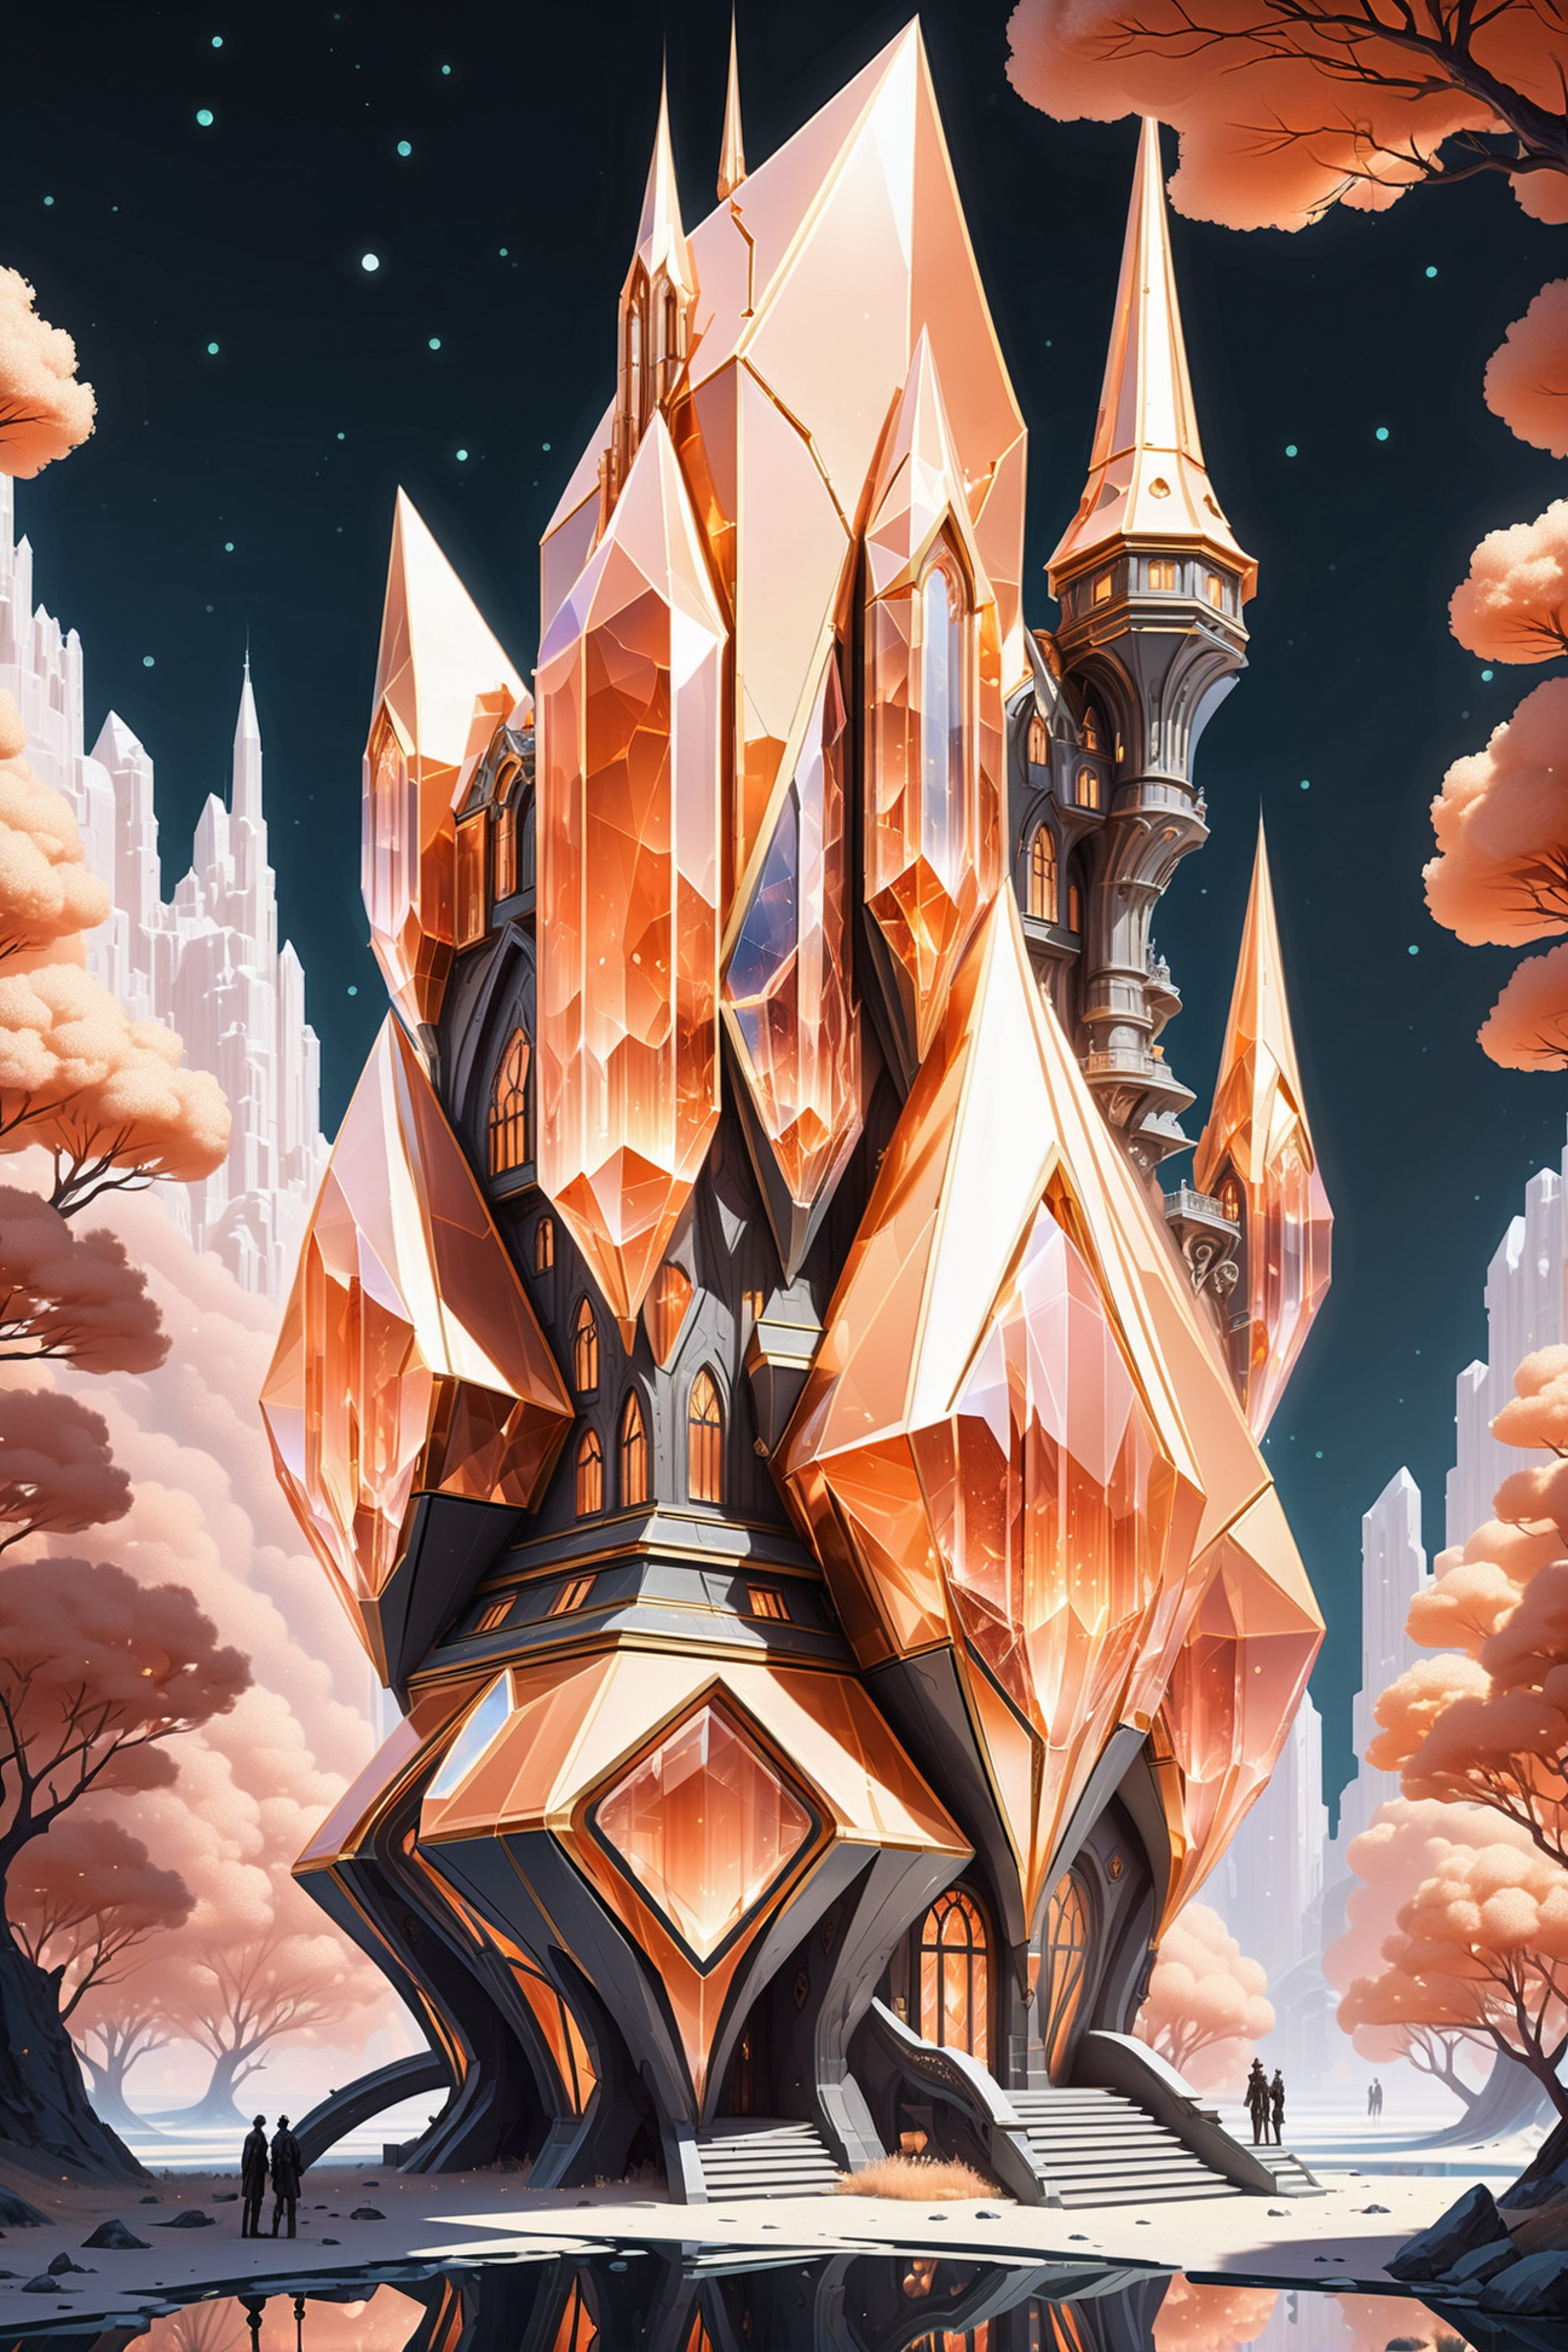 Fairy tale castle with crystal and gold elements and trees in the background.